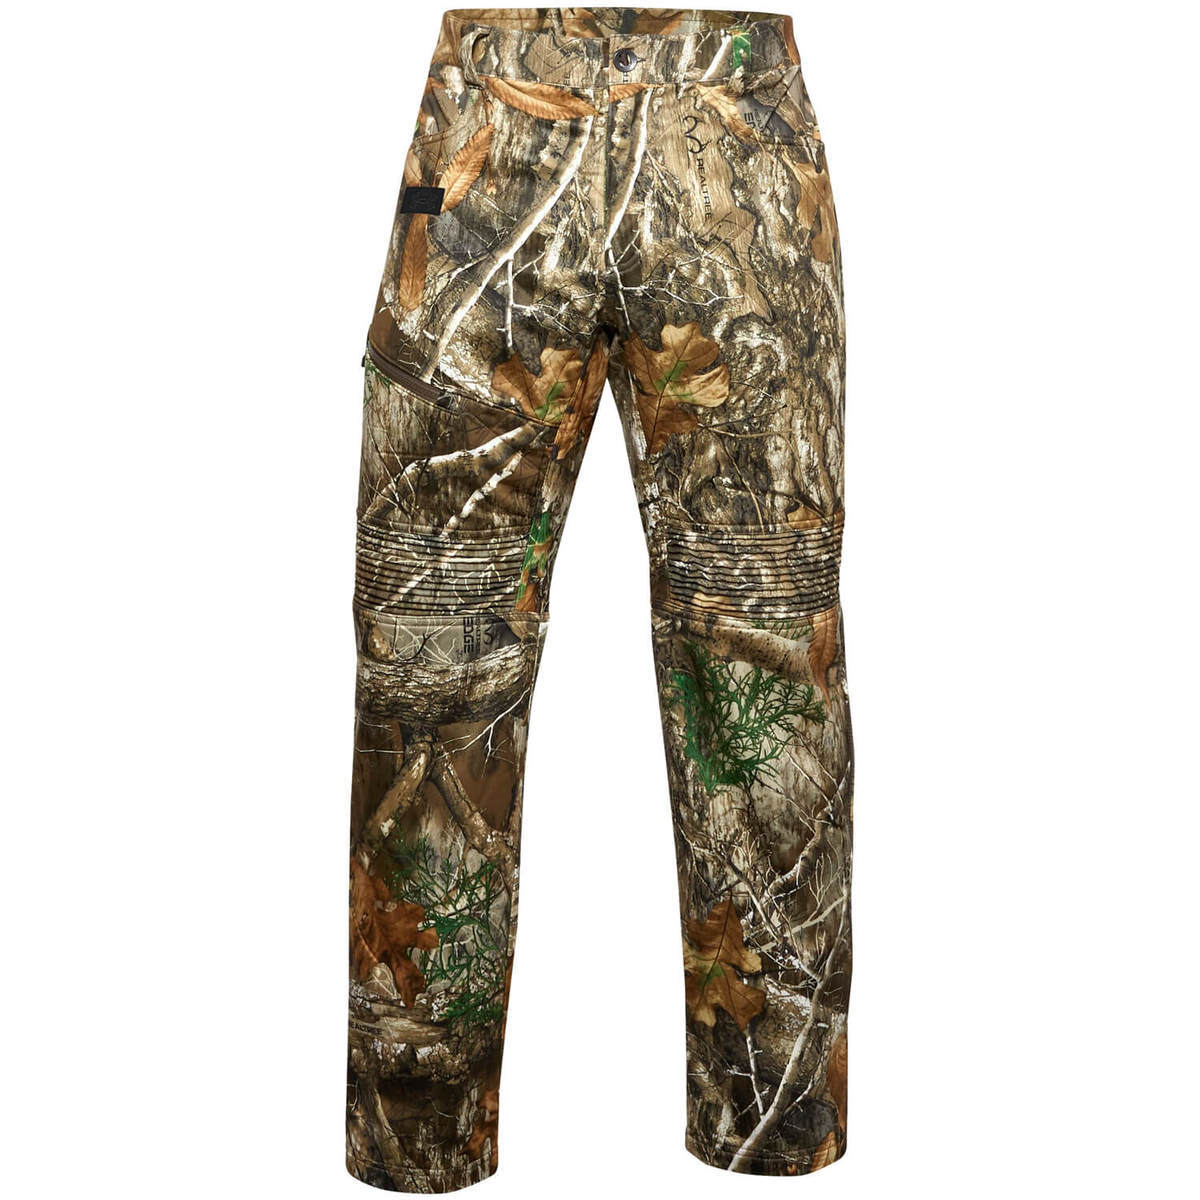 Under Armour Men's Brow Tine Hunting Pants | Sportsman's Warehouse